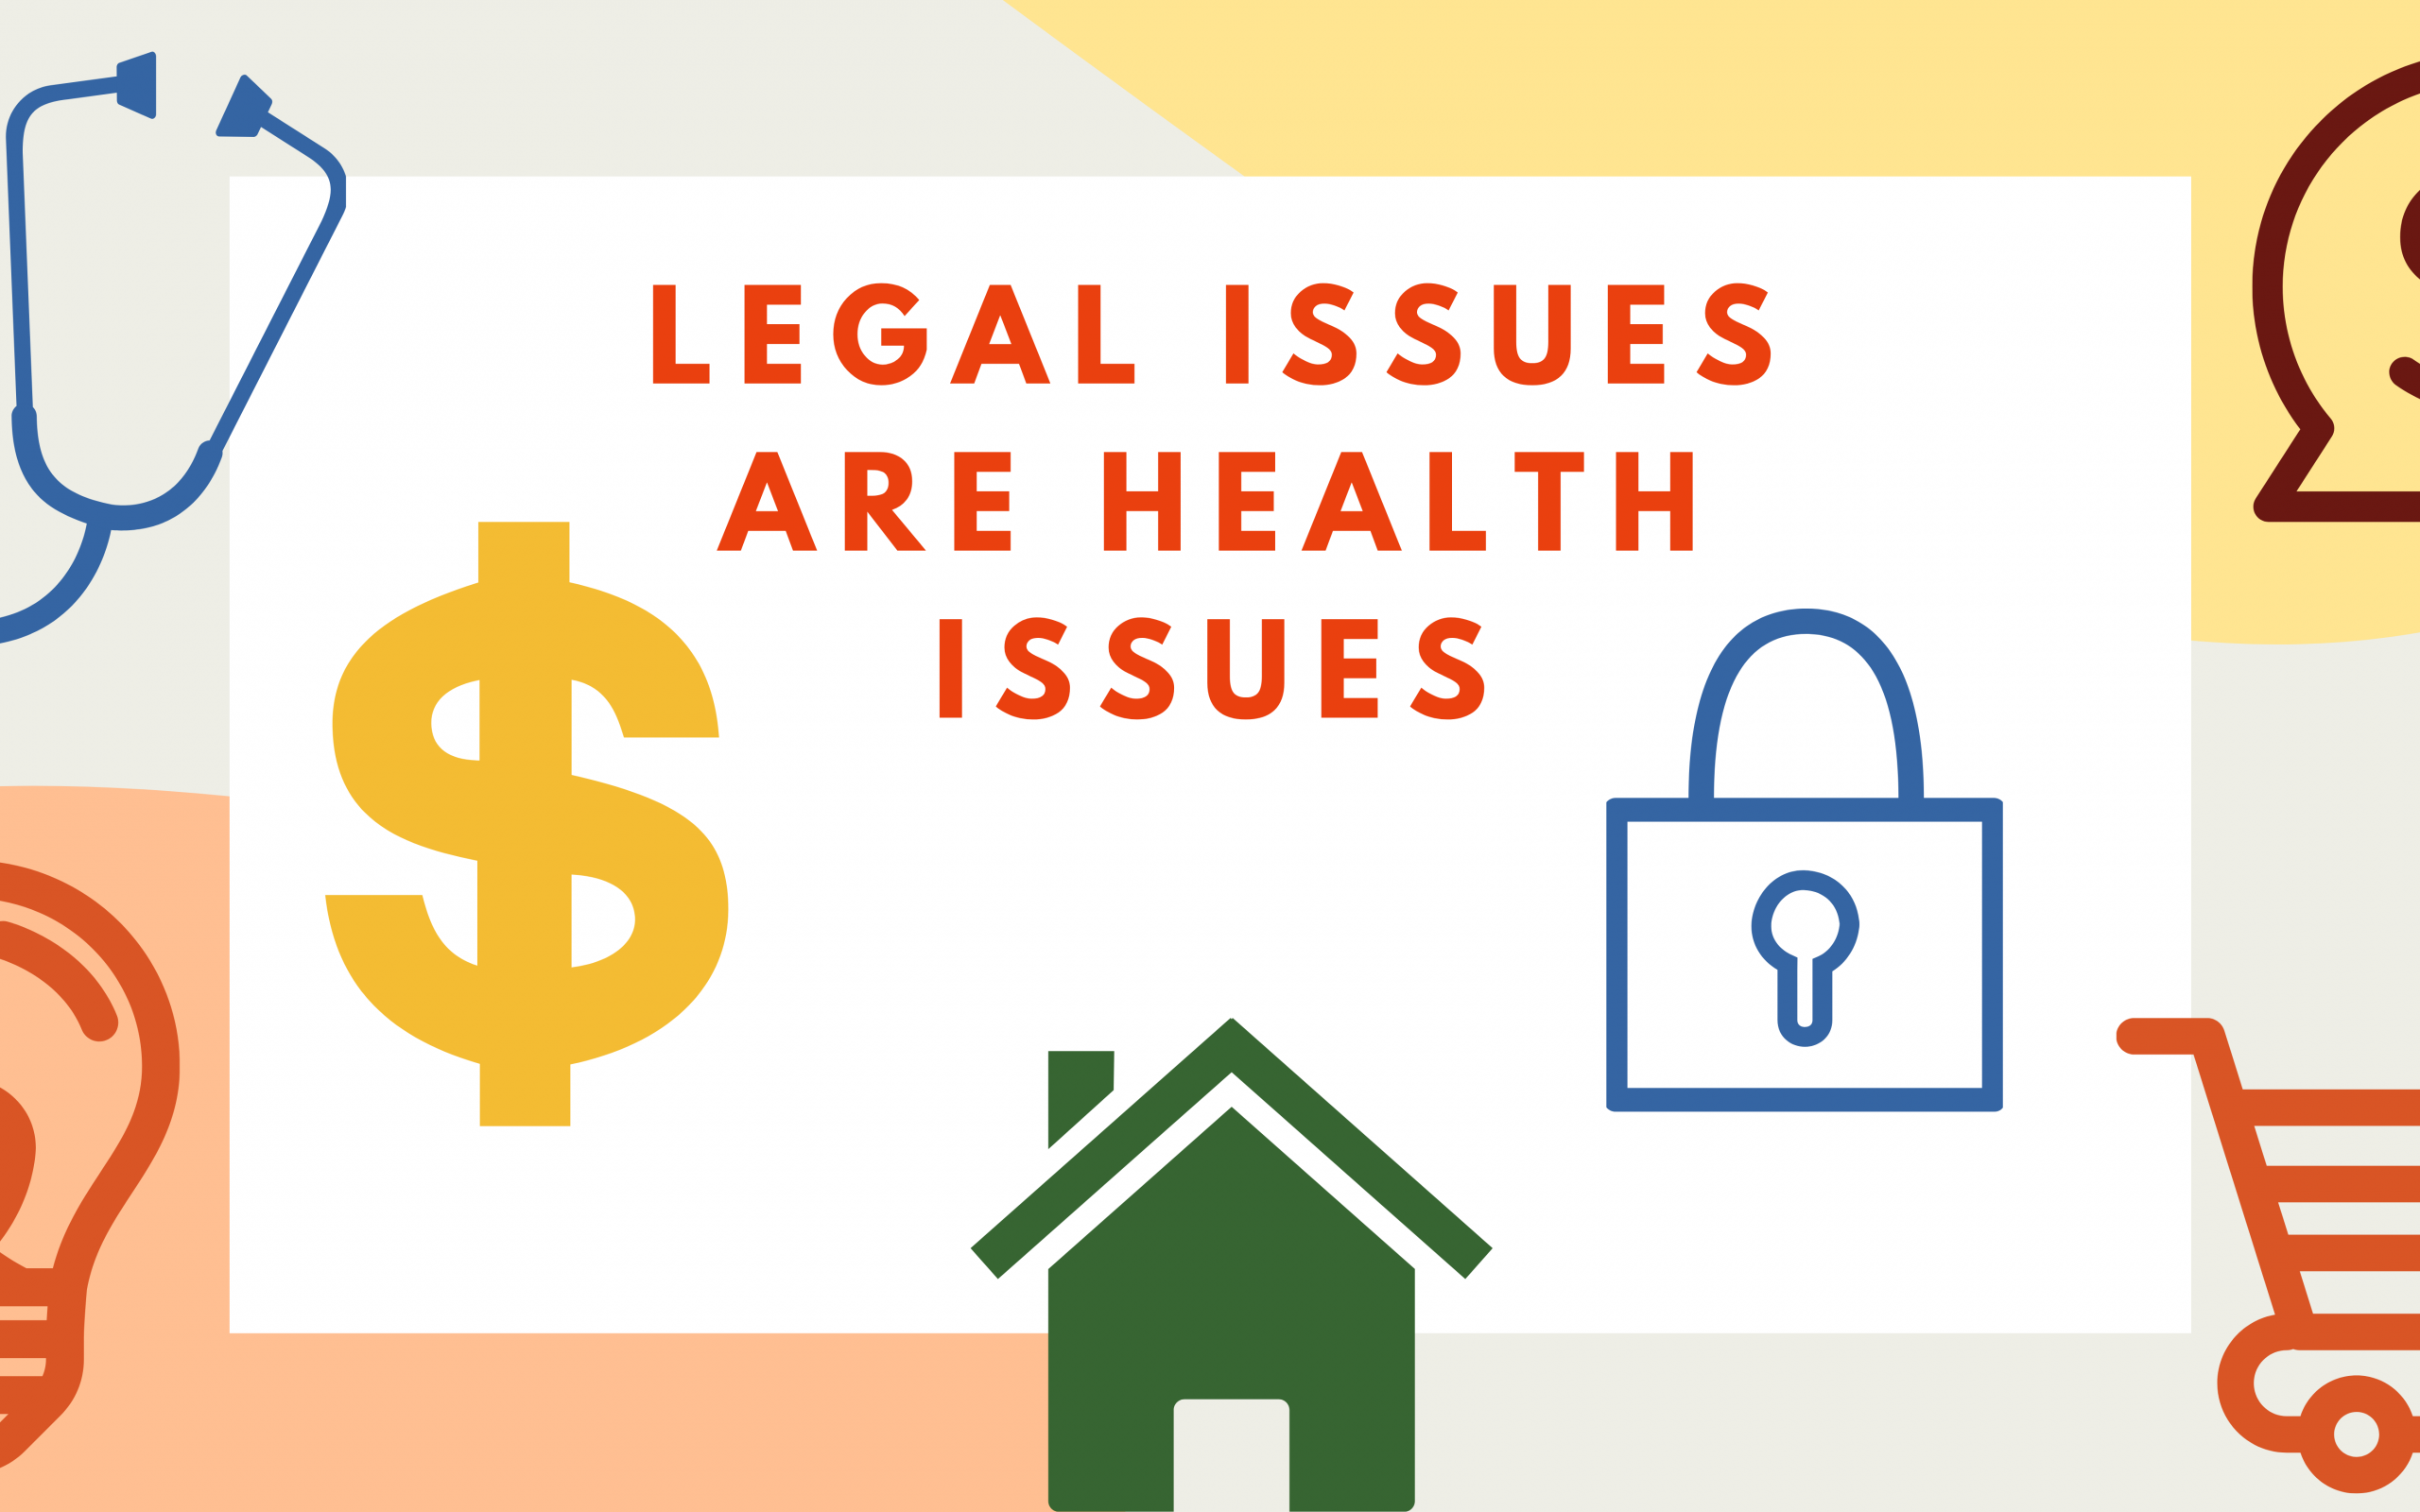 graphic reading "legal issues are health issues"